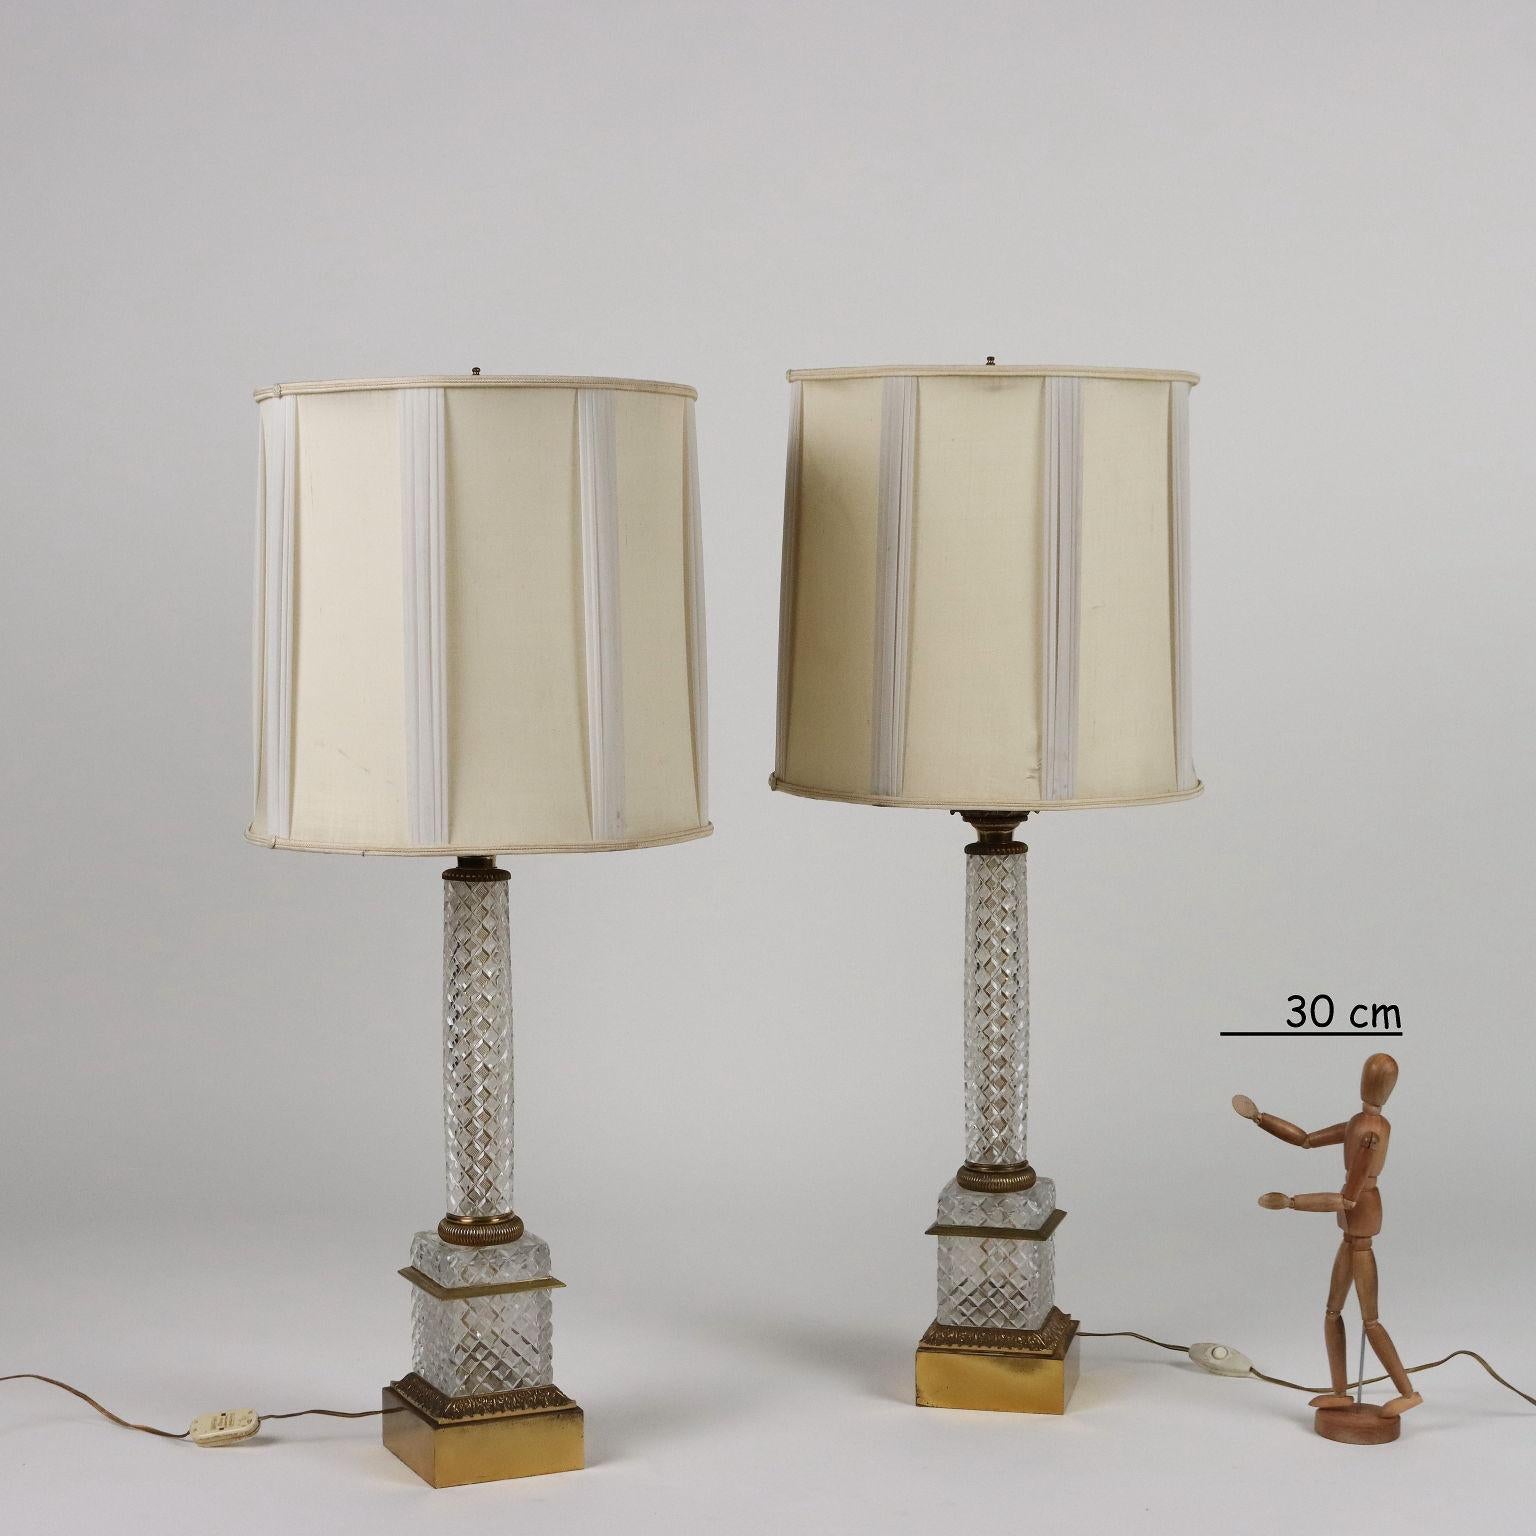 Pair of lamps in cut crystal and bronze with fabric lampshades. Adhesive label of the manufacturer under the base of a lamp.